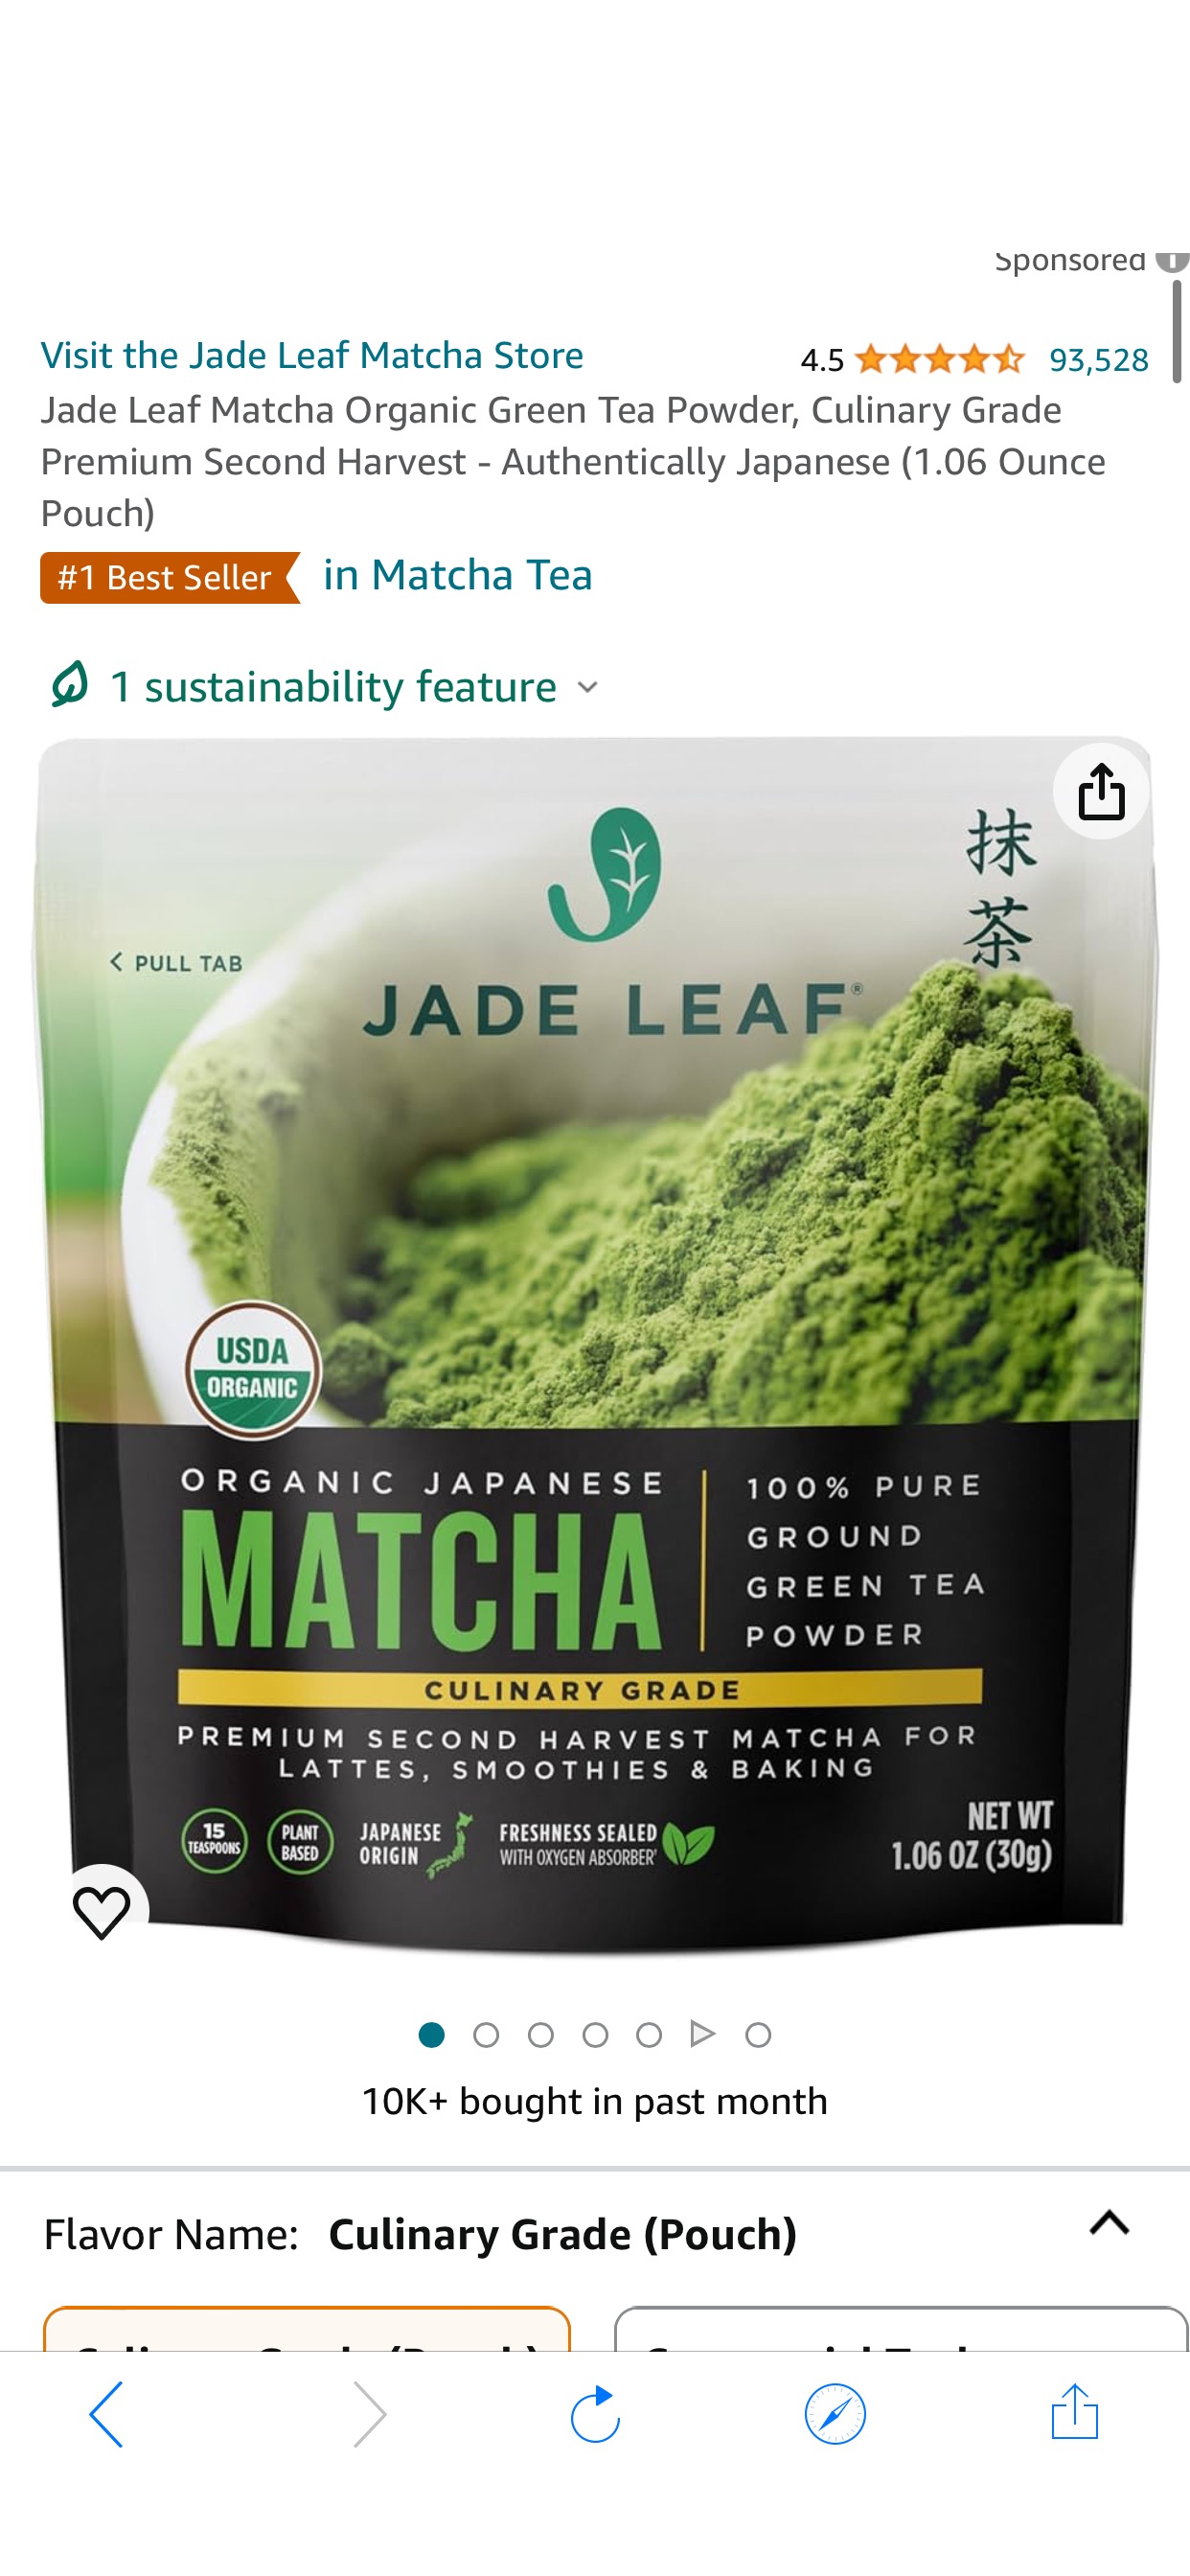 Amazon.com: Jade Leaf Matcha Organic Green Tea Powder, Culinary Grade Premium Second Harvest - Authentically Japanese (1.06 Ounce Pouch) : Grocery & Gourmet Food 有机抹茶粉